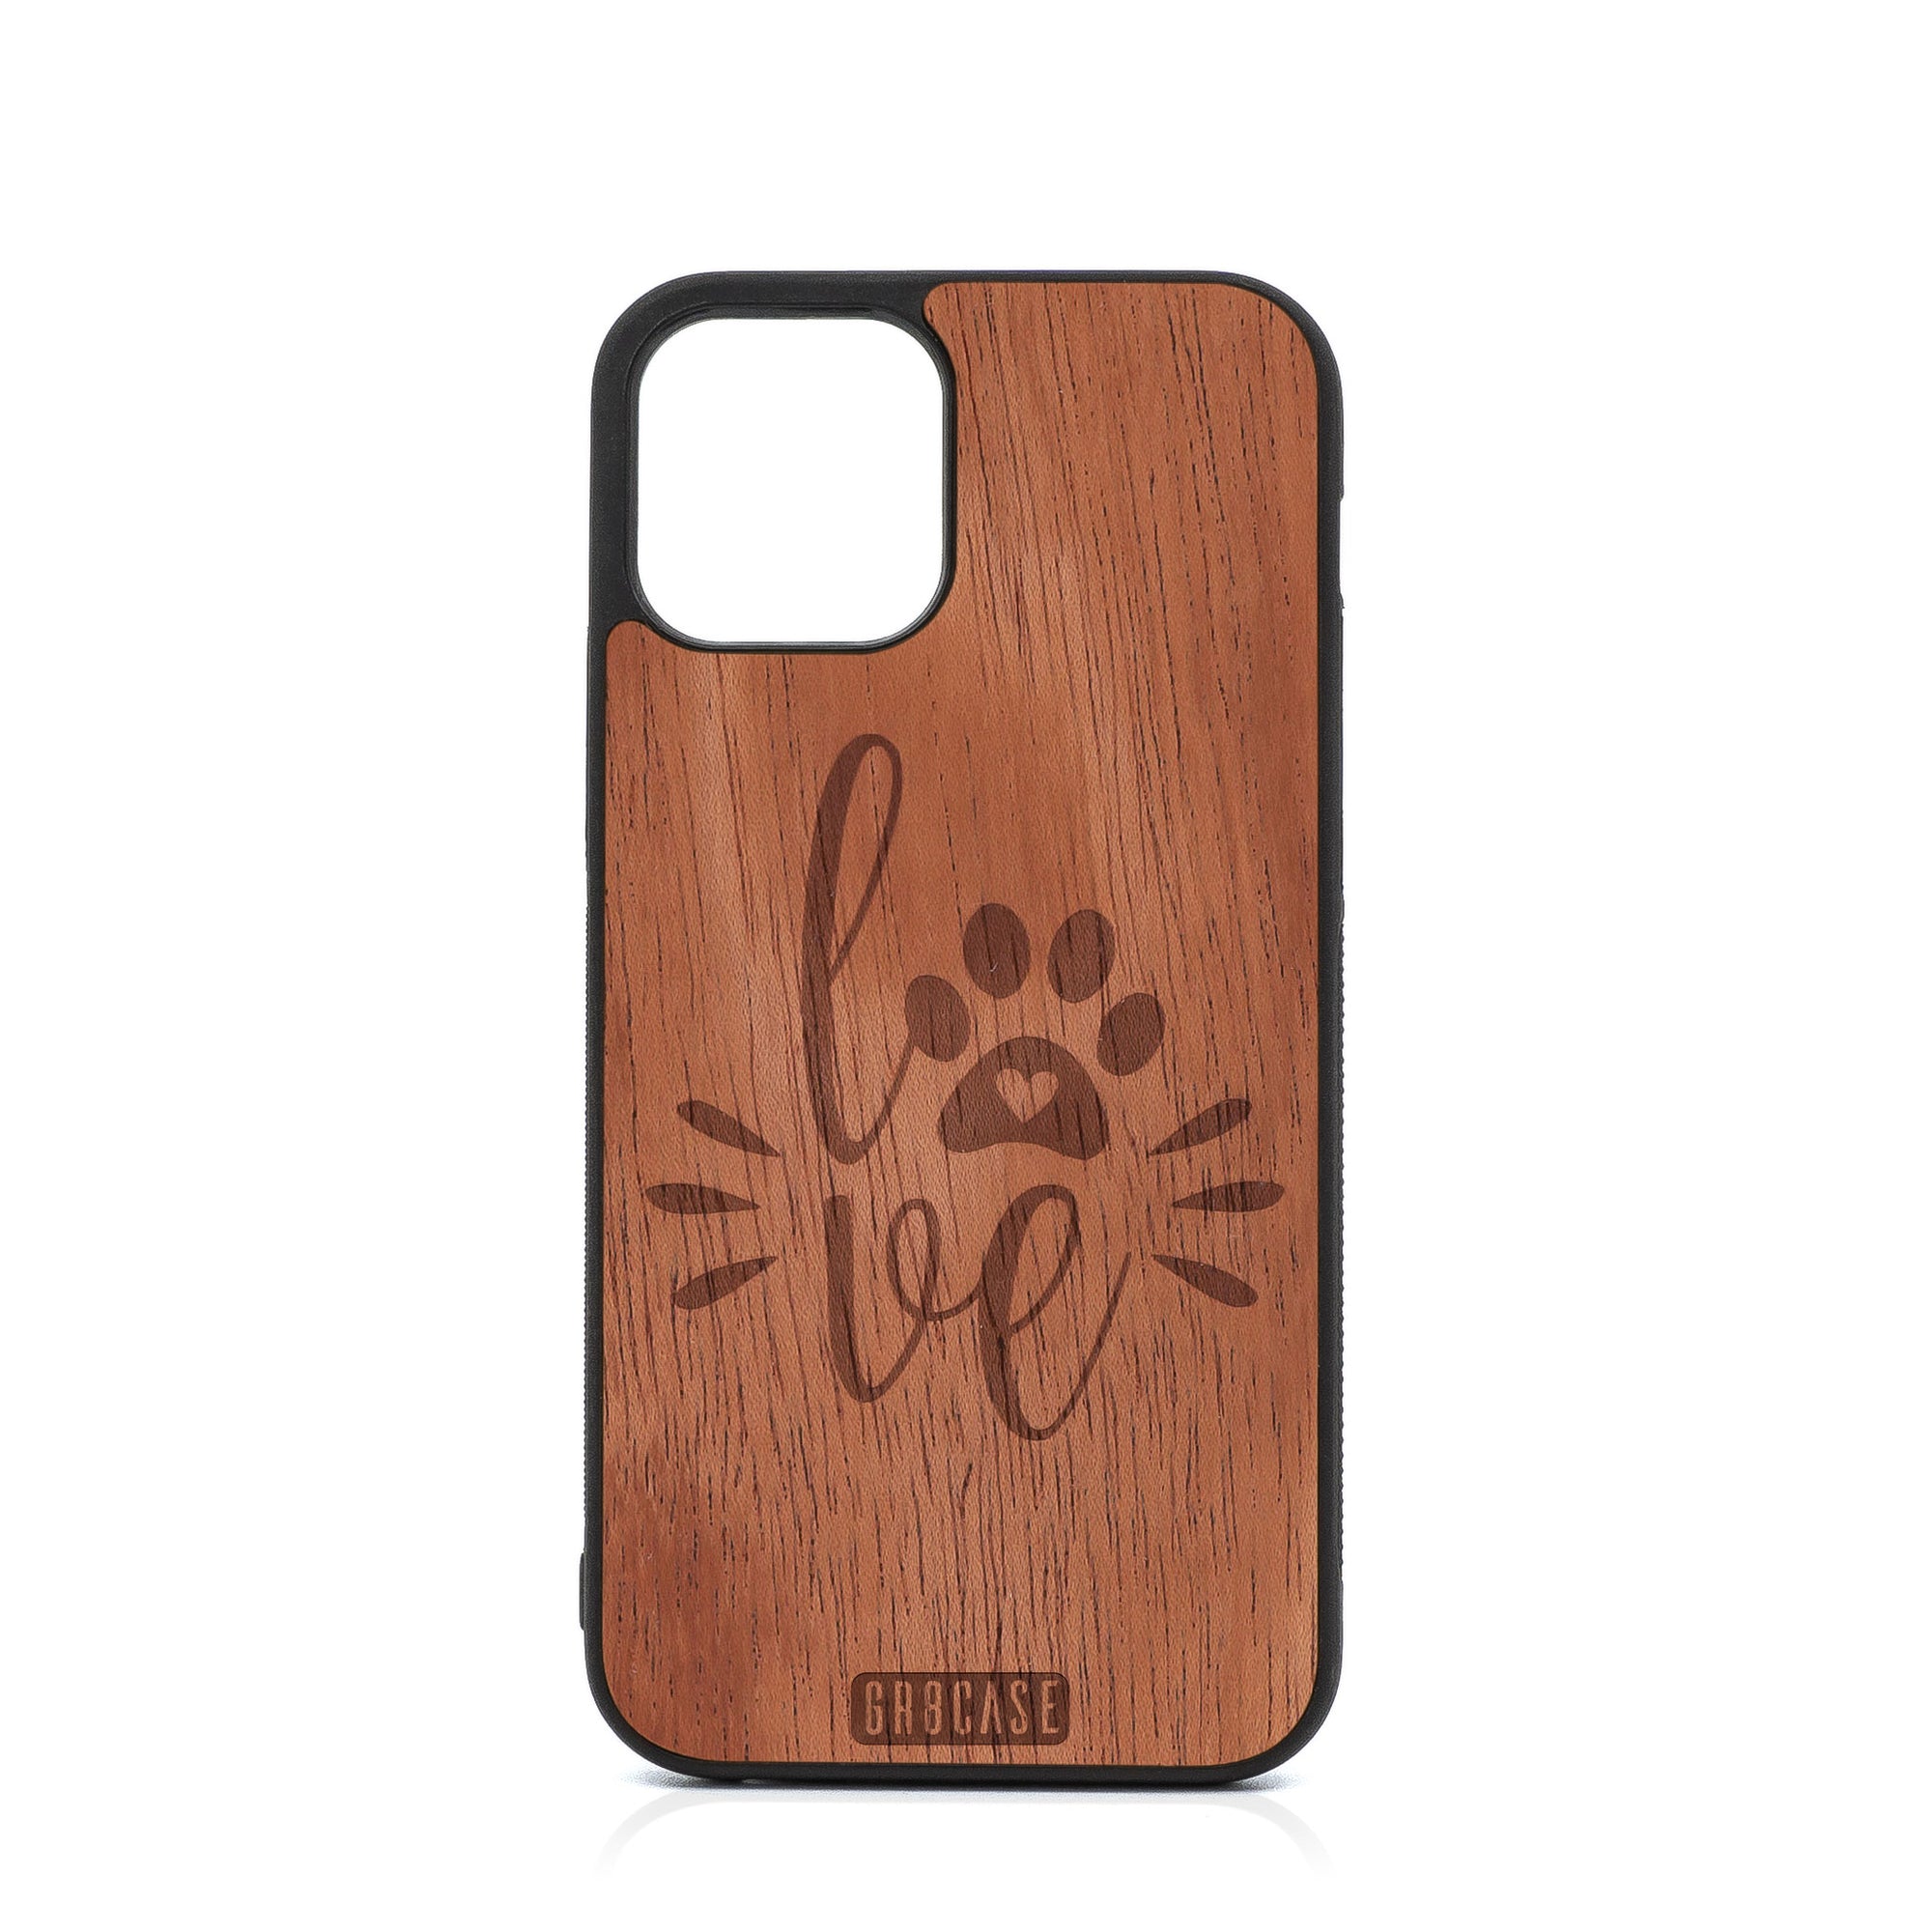 Paw Love Design Wood Case For iPhone 12 Pro